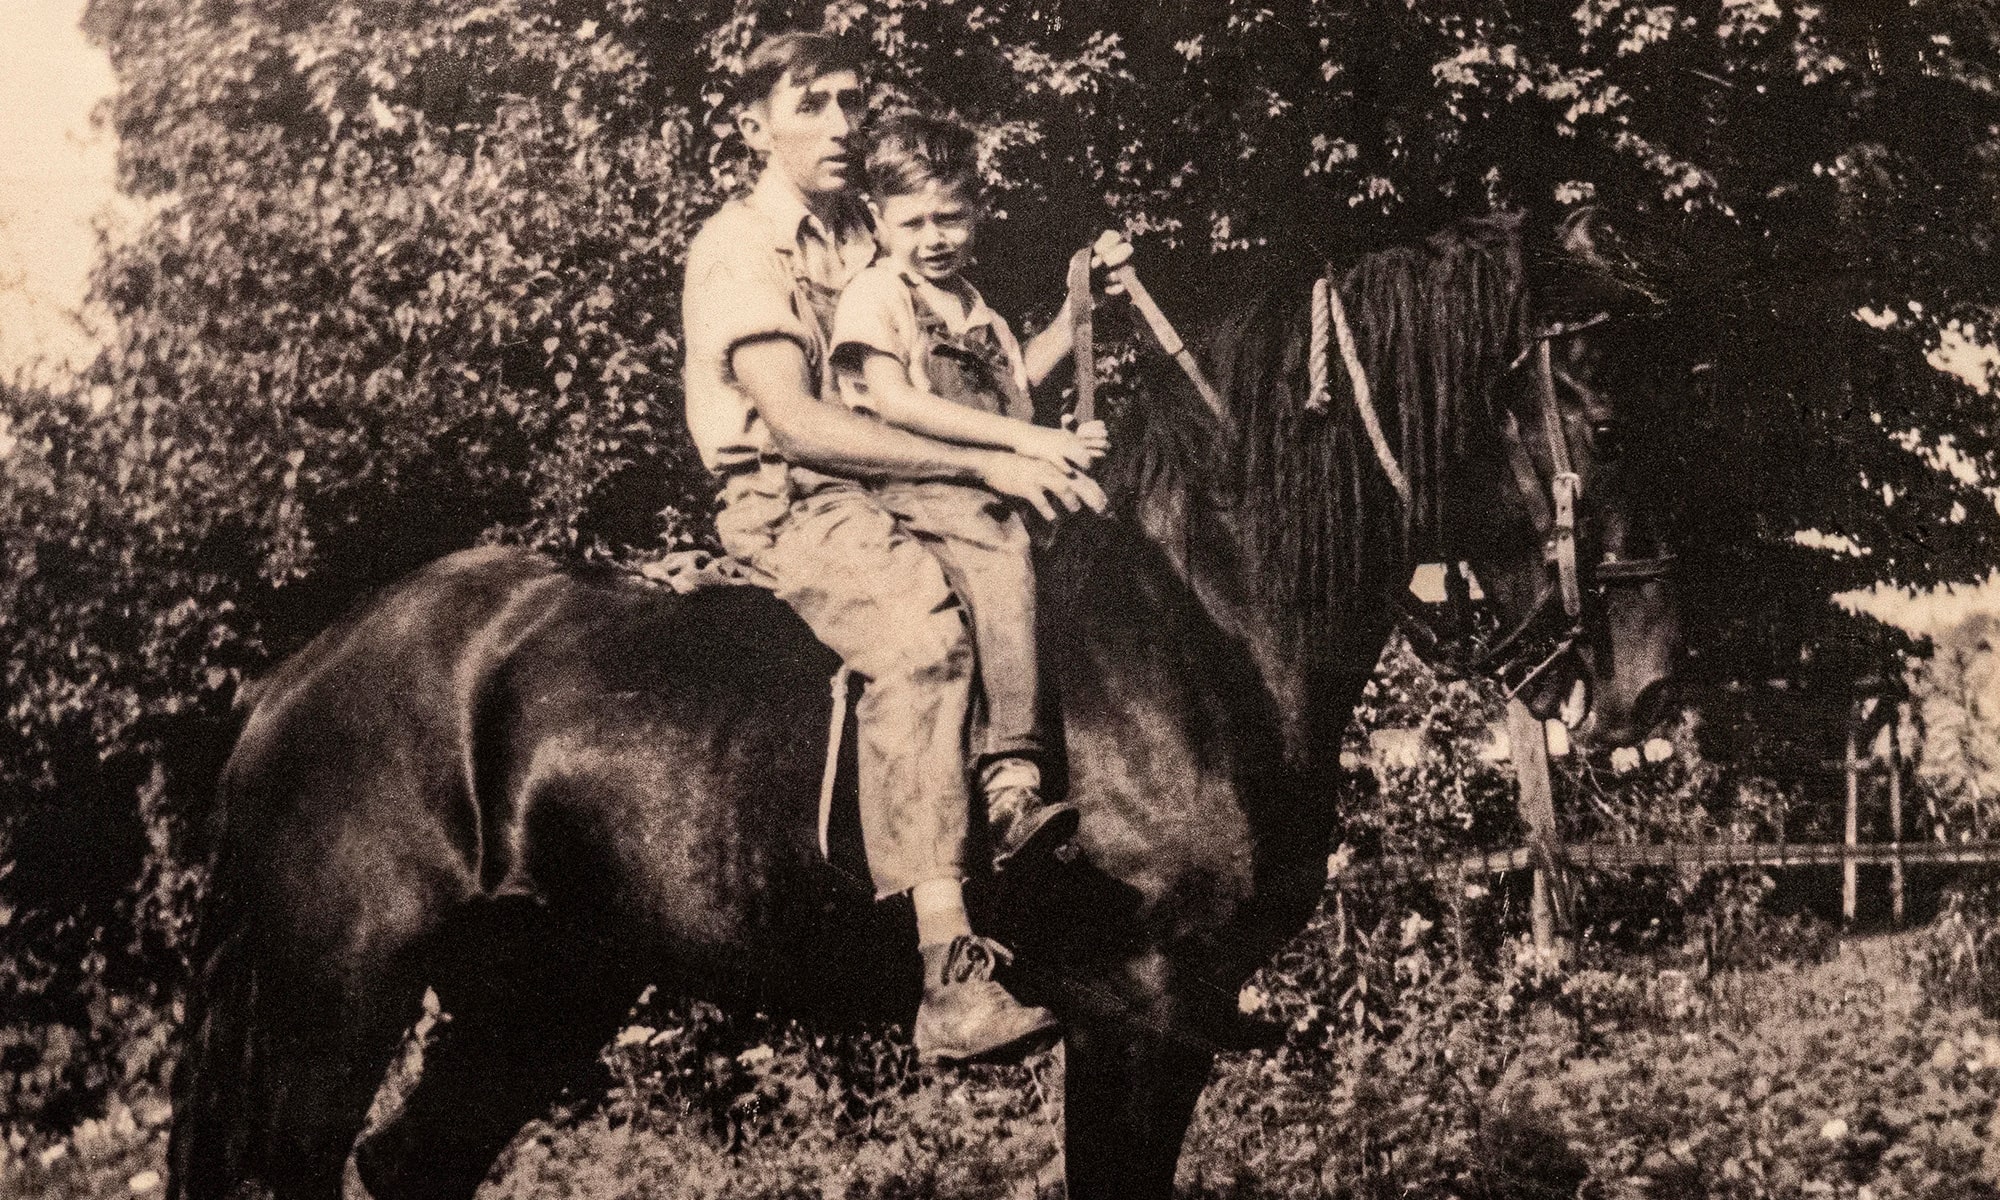 Wayne and Hal Burlingame share a ride. Photo credit: Reclaiming our Heritage collection